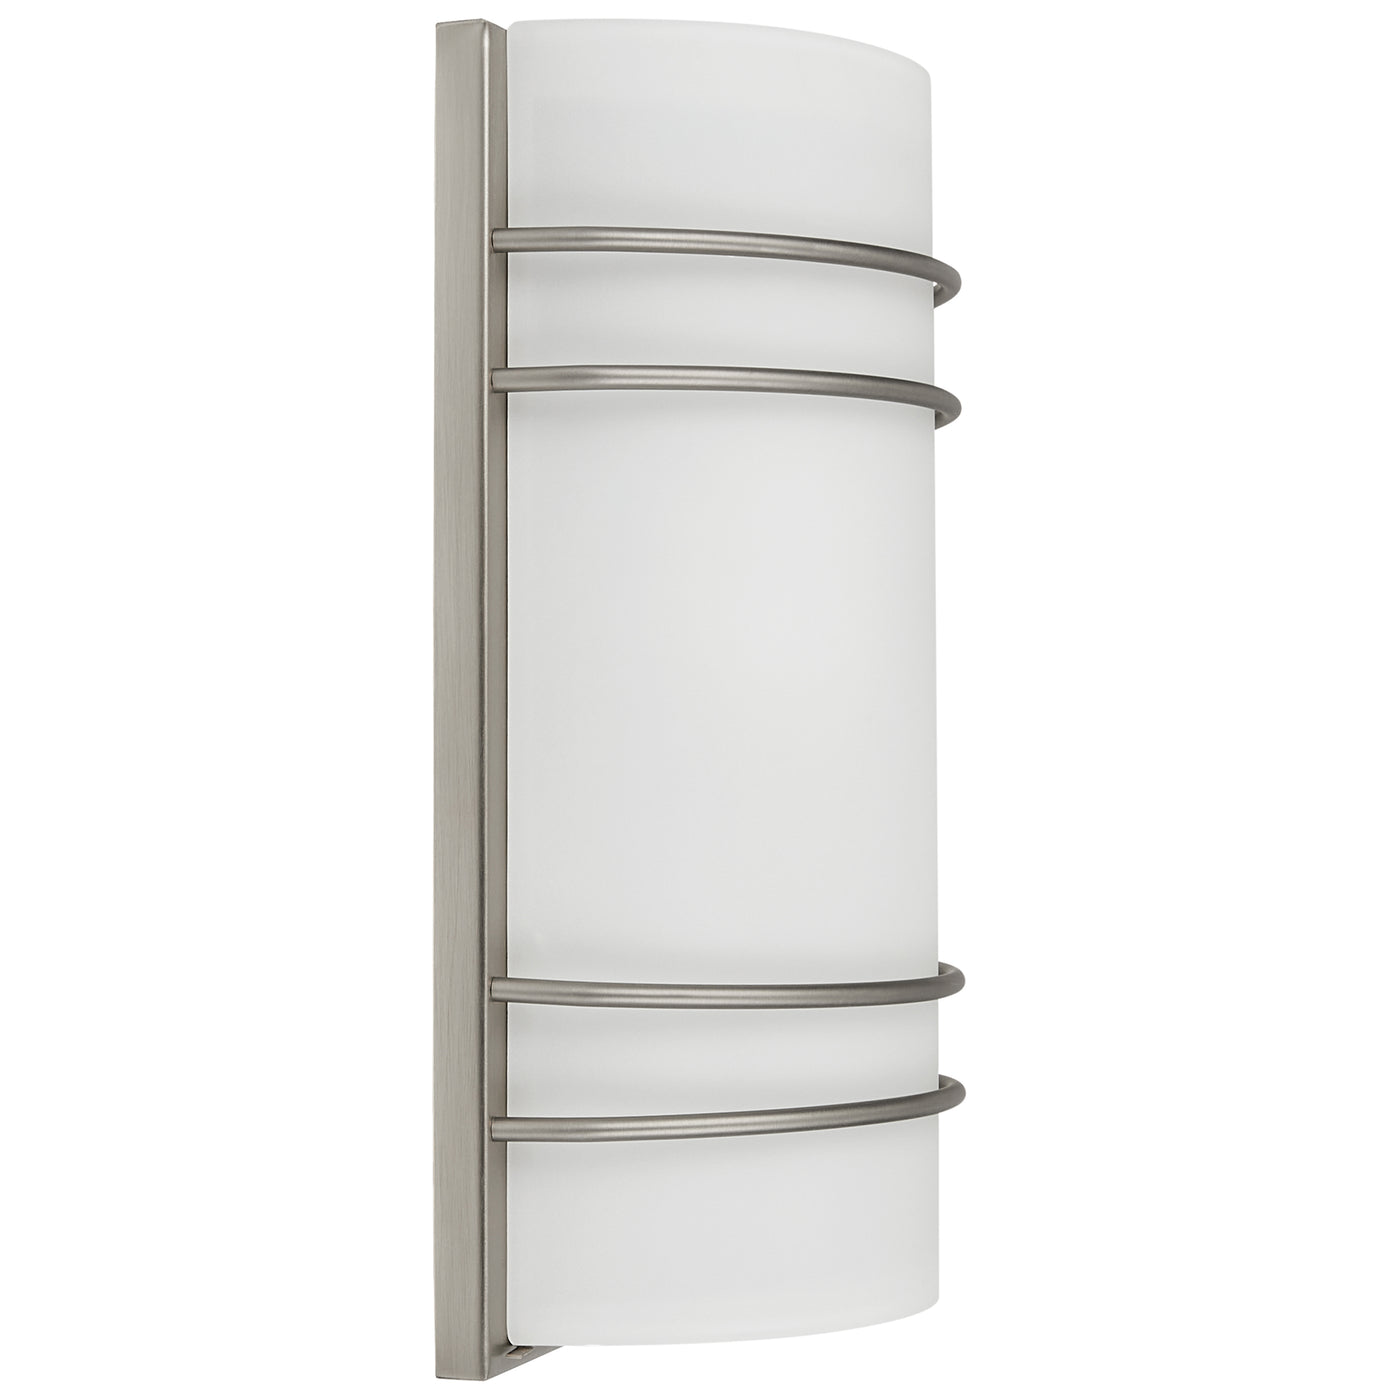 2 Light Wall Sconce, 120W, 120V, Brushed Steel Finish, Cassi Collection